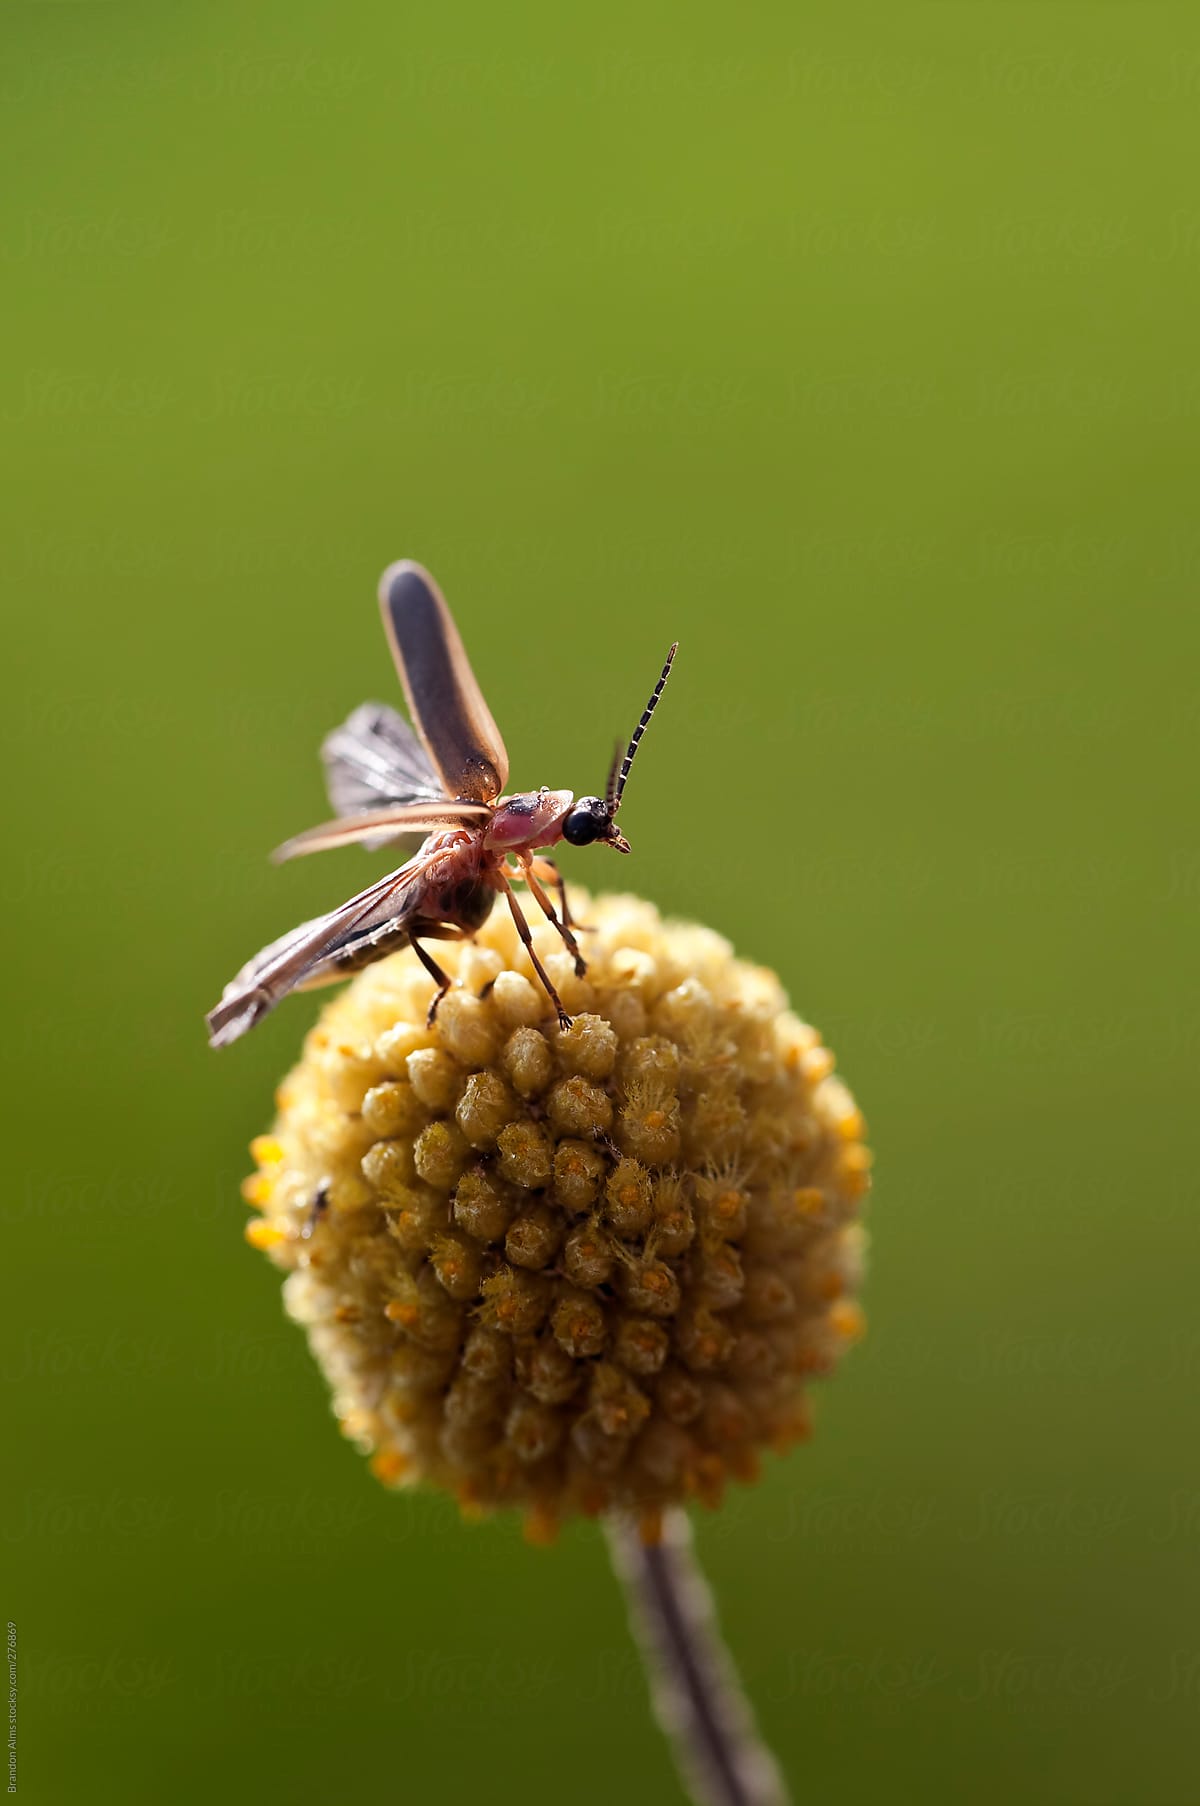 Lightning Bug Takes Off In Flight From A Billy Button Flower